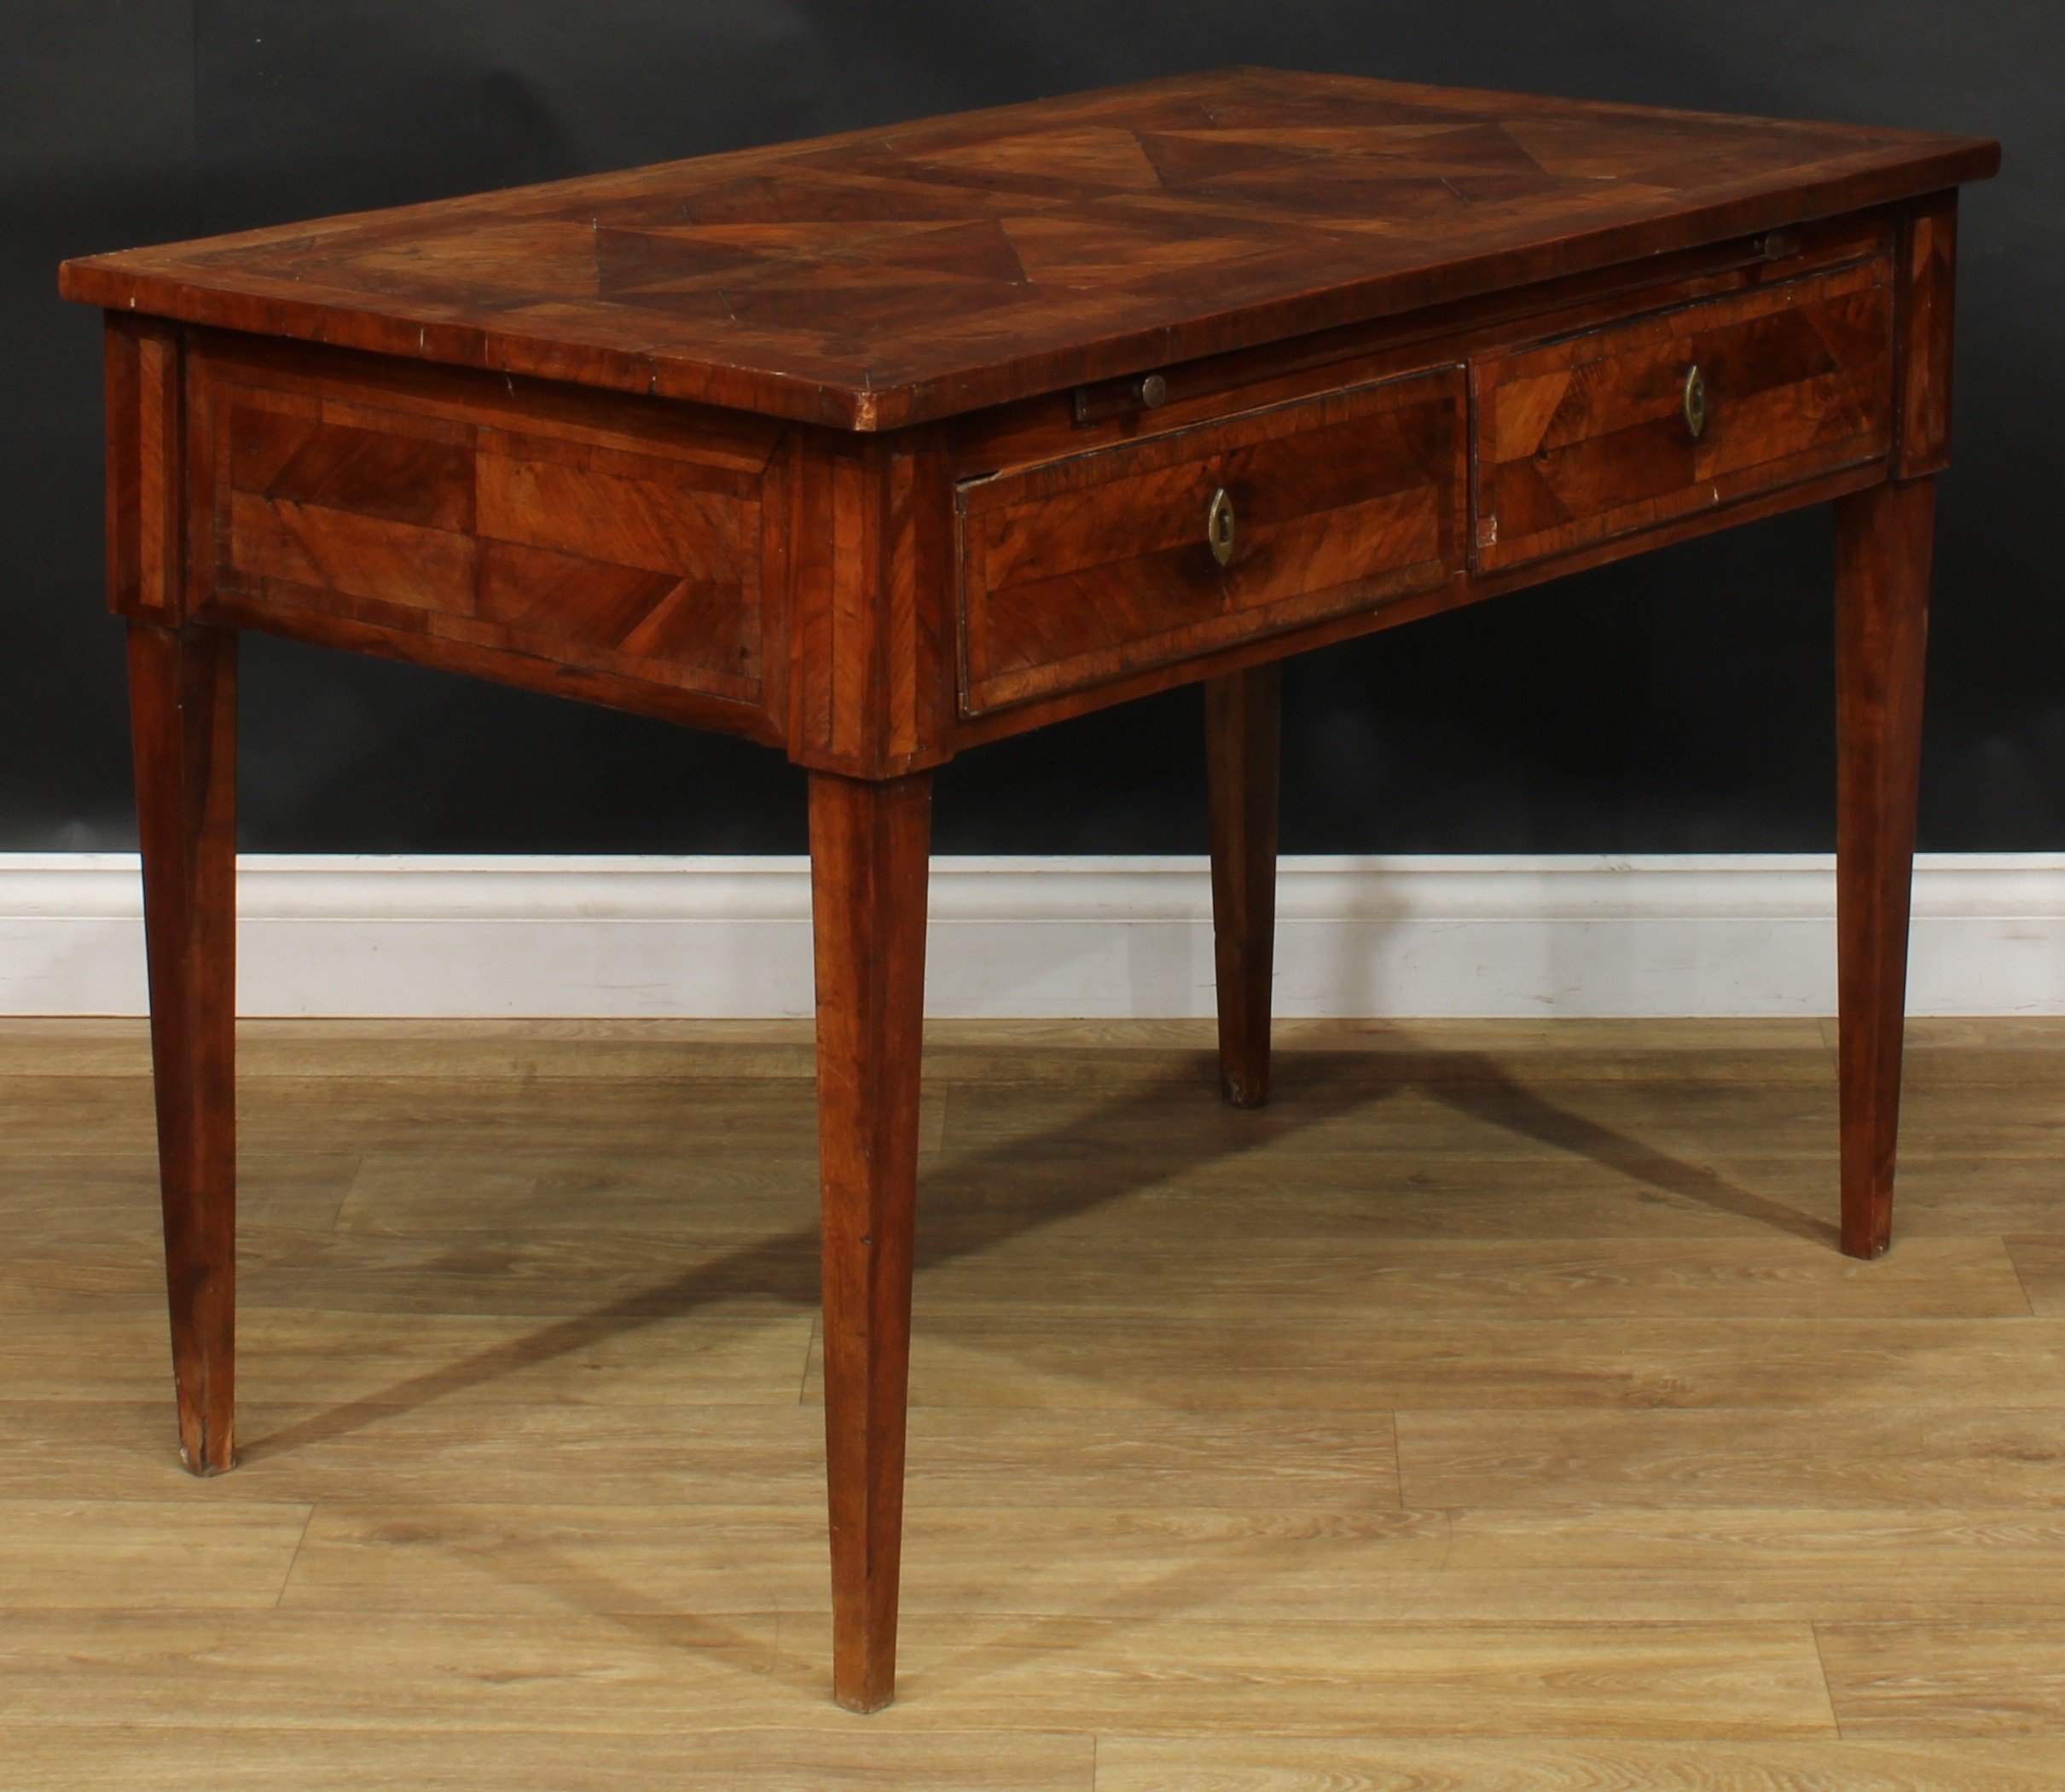 An 18th century French Provincial side table, rectangular top with geometric parquetry veneers, - Image 3 of 7